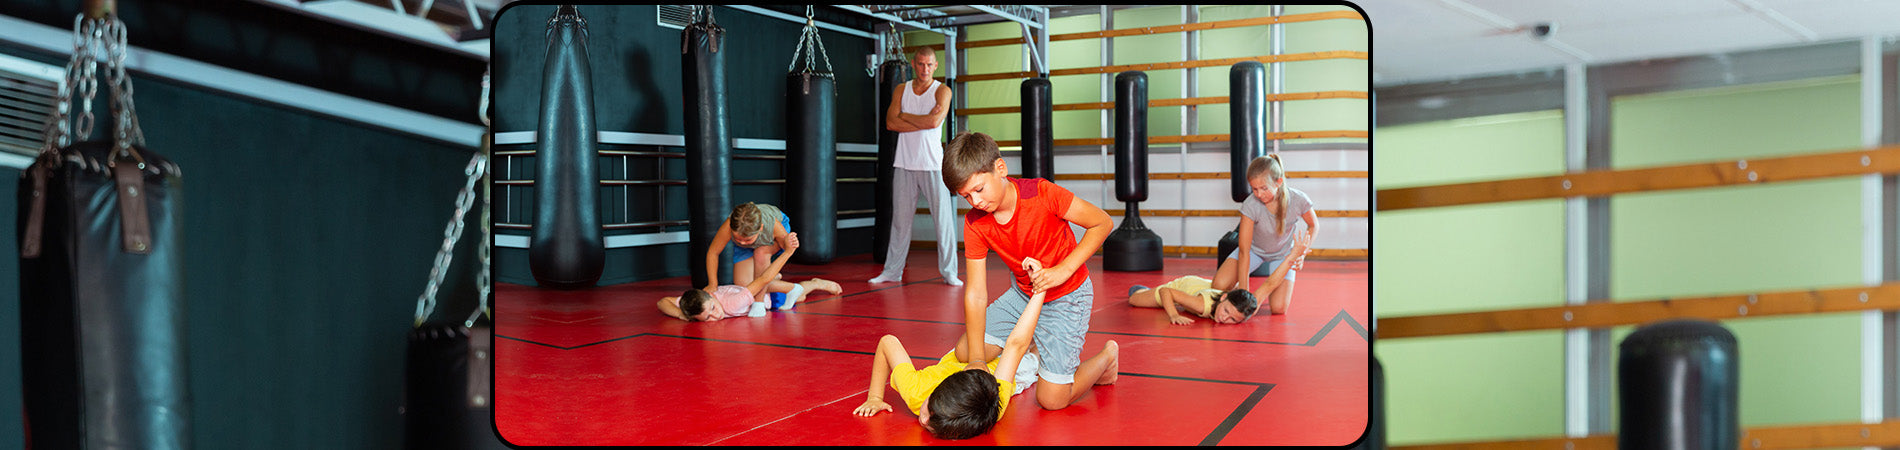 12 Best Rules for Hygiene in Martial Arts Gym